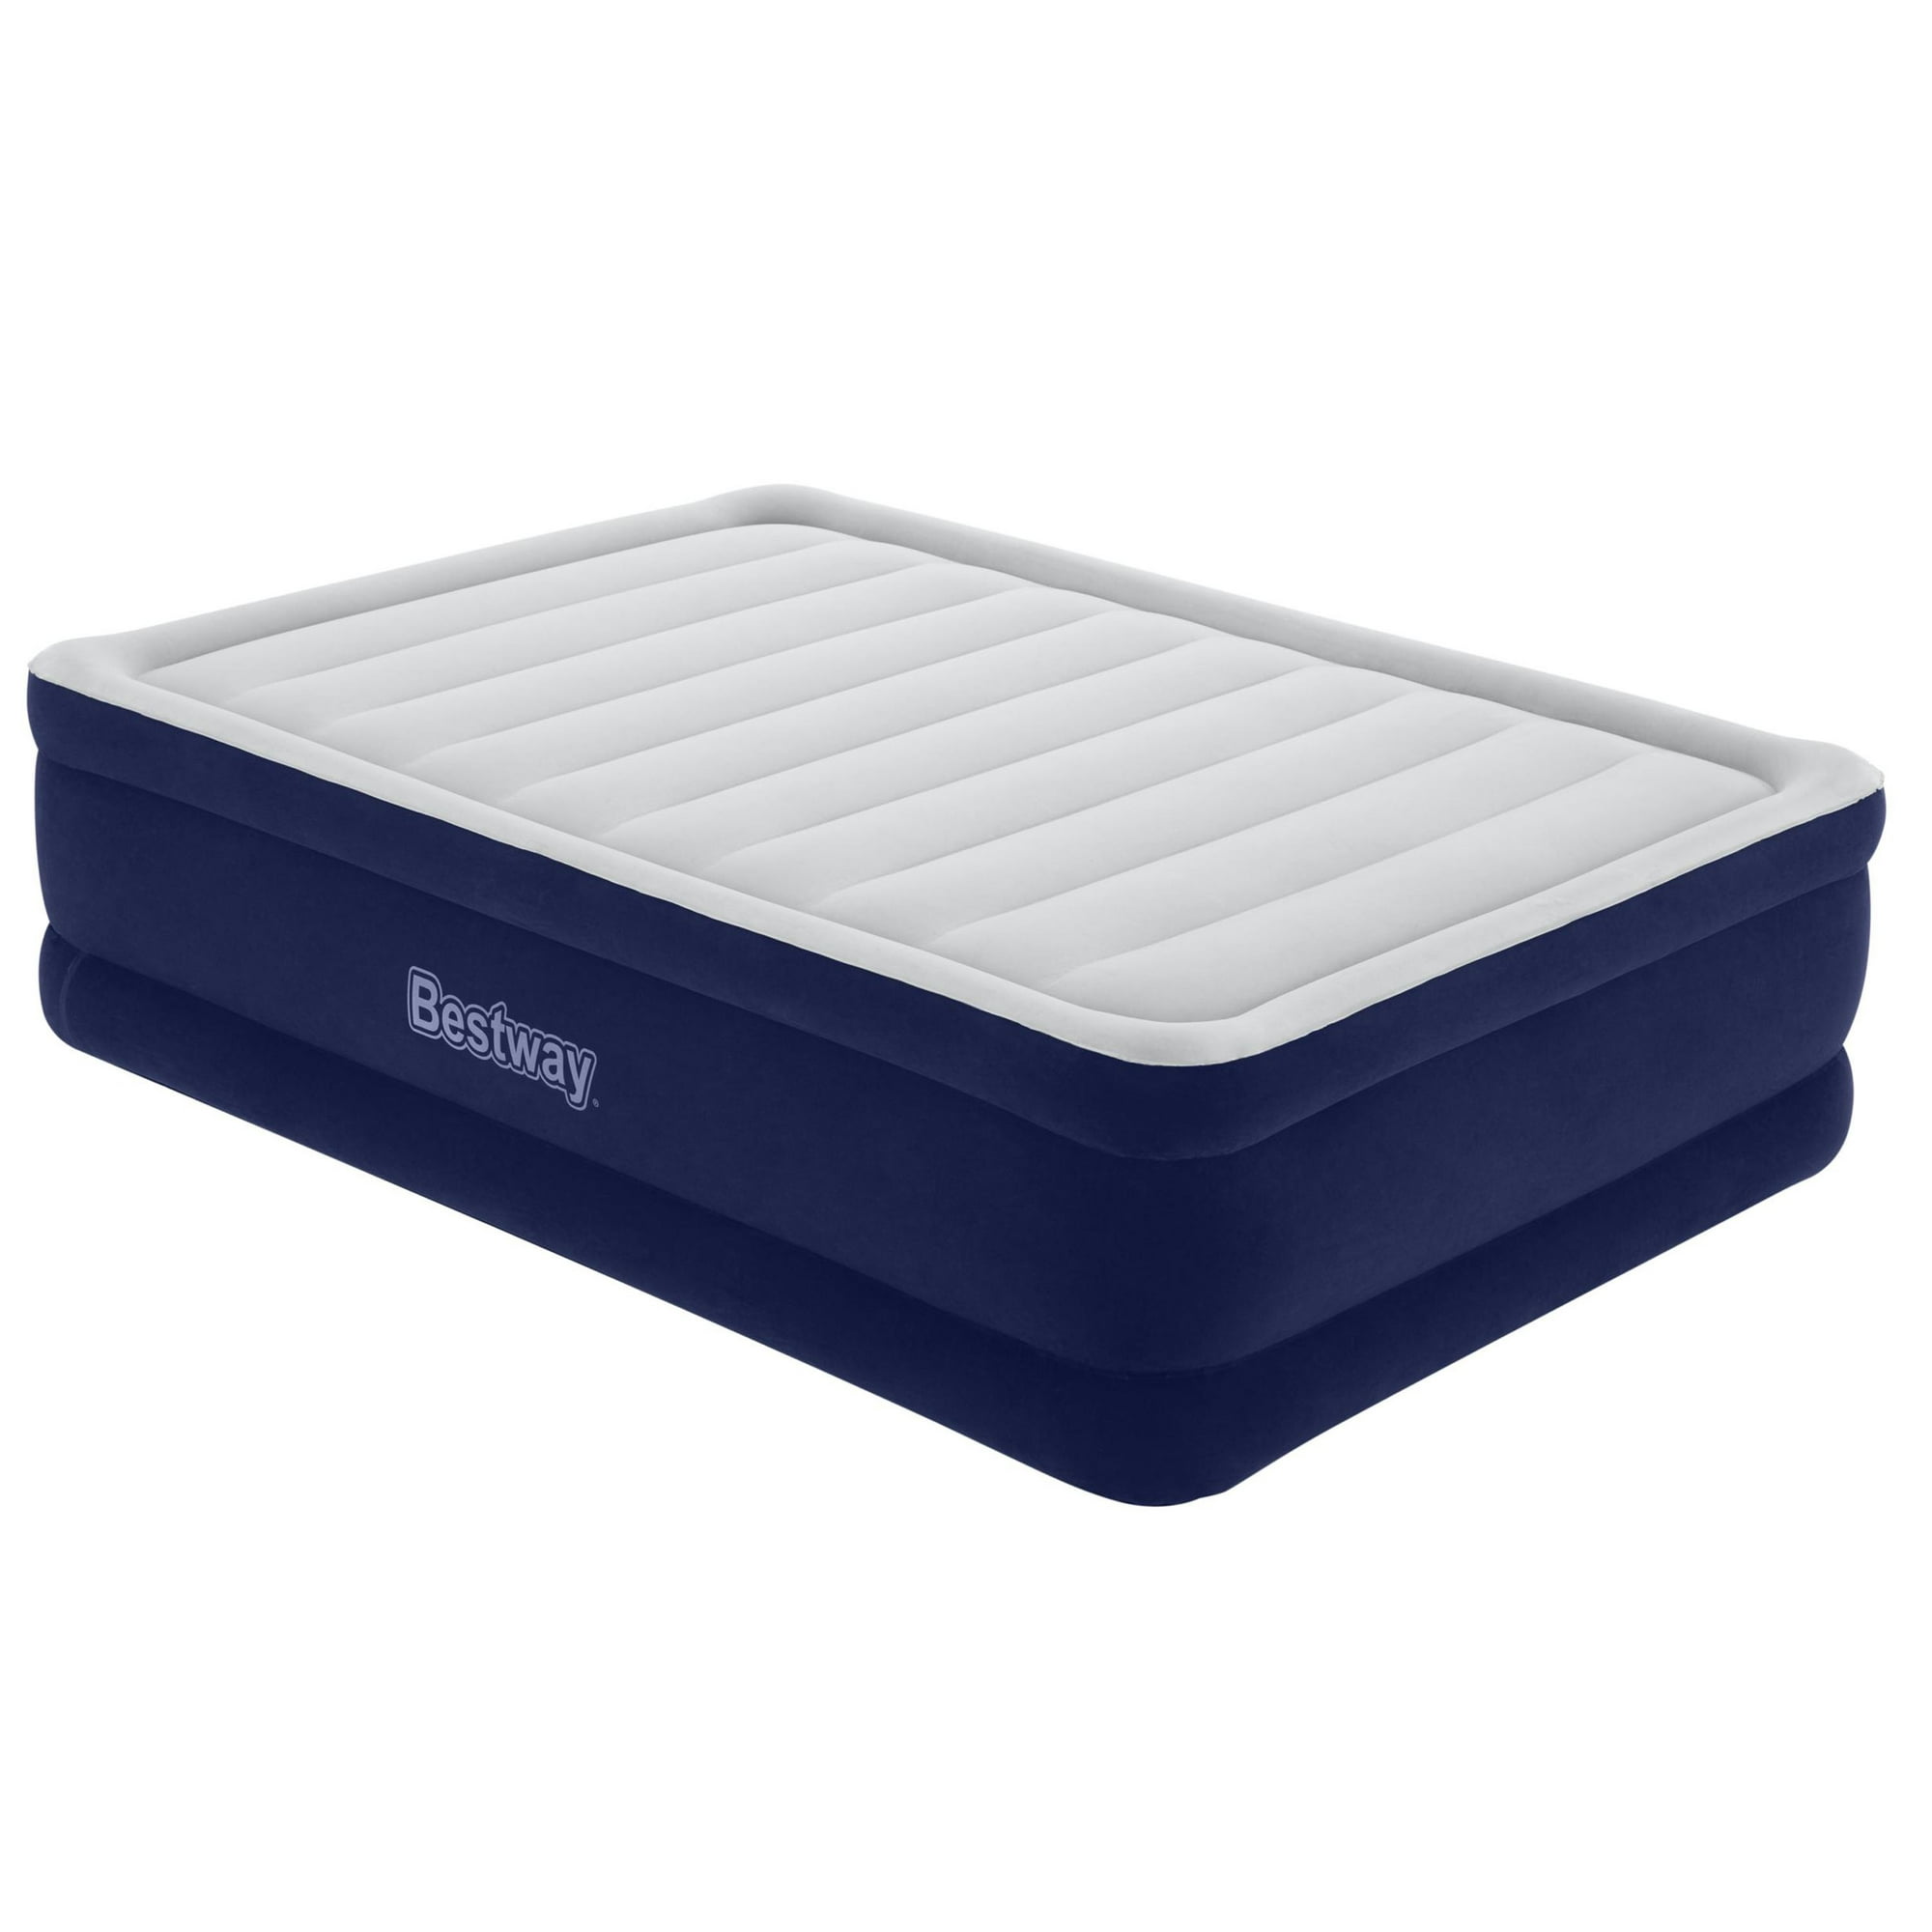 Bestway-Tritech-Air-Mattress-Queen-22-in-with-Built-in-AC-Pump-and-Antimicrobial-Coating_09333a9d-e60c-4b85-9a8d-789a6afaf155.6fa492260db15d9b2a1a835fa360c369.jpeg?odnHeight=2000&odnWidth=2000&odnBg=FFFFFF